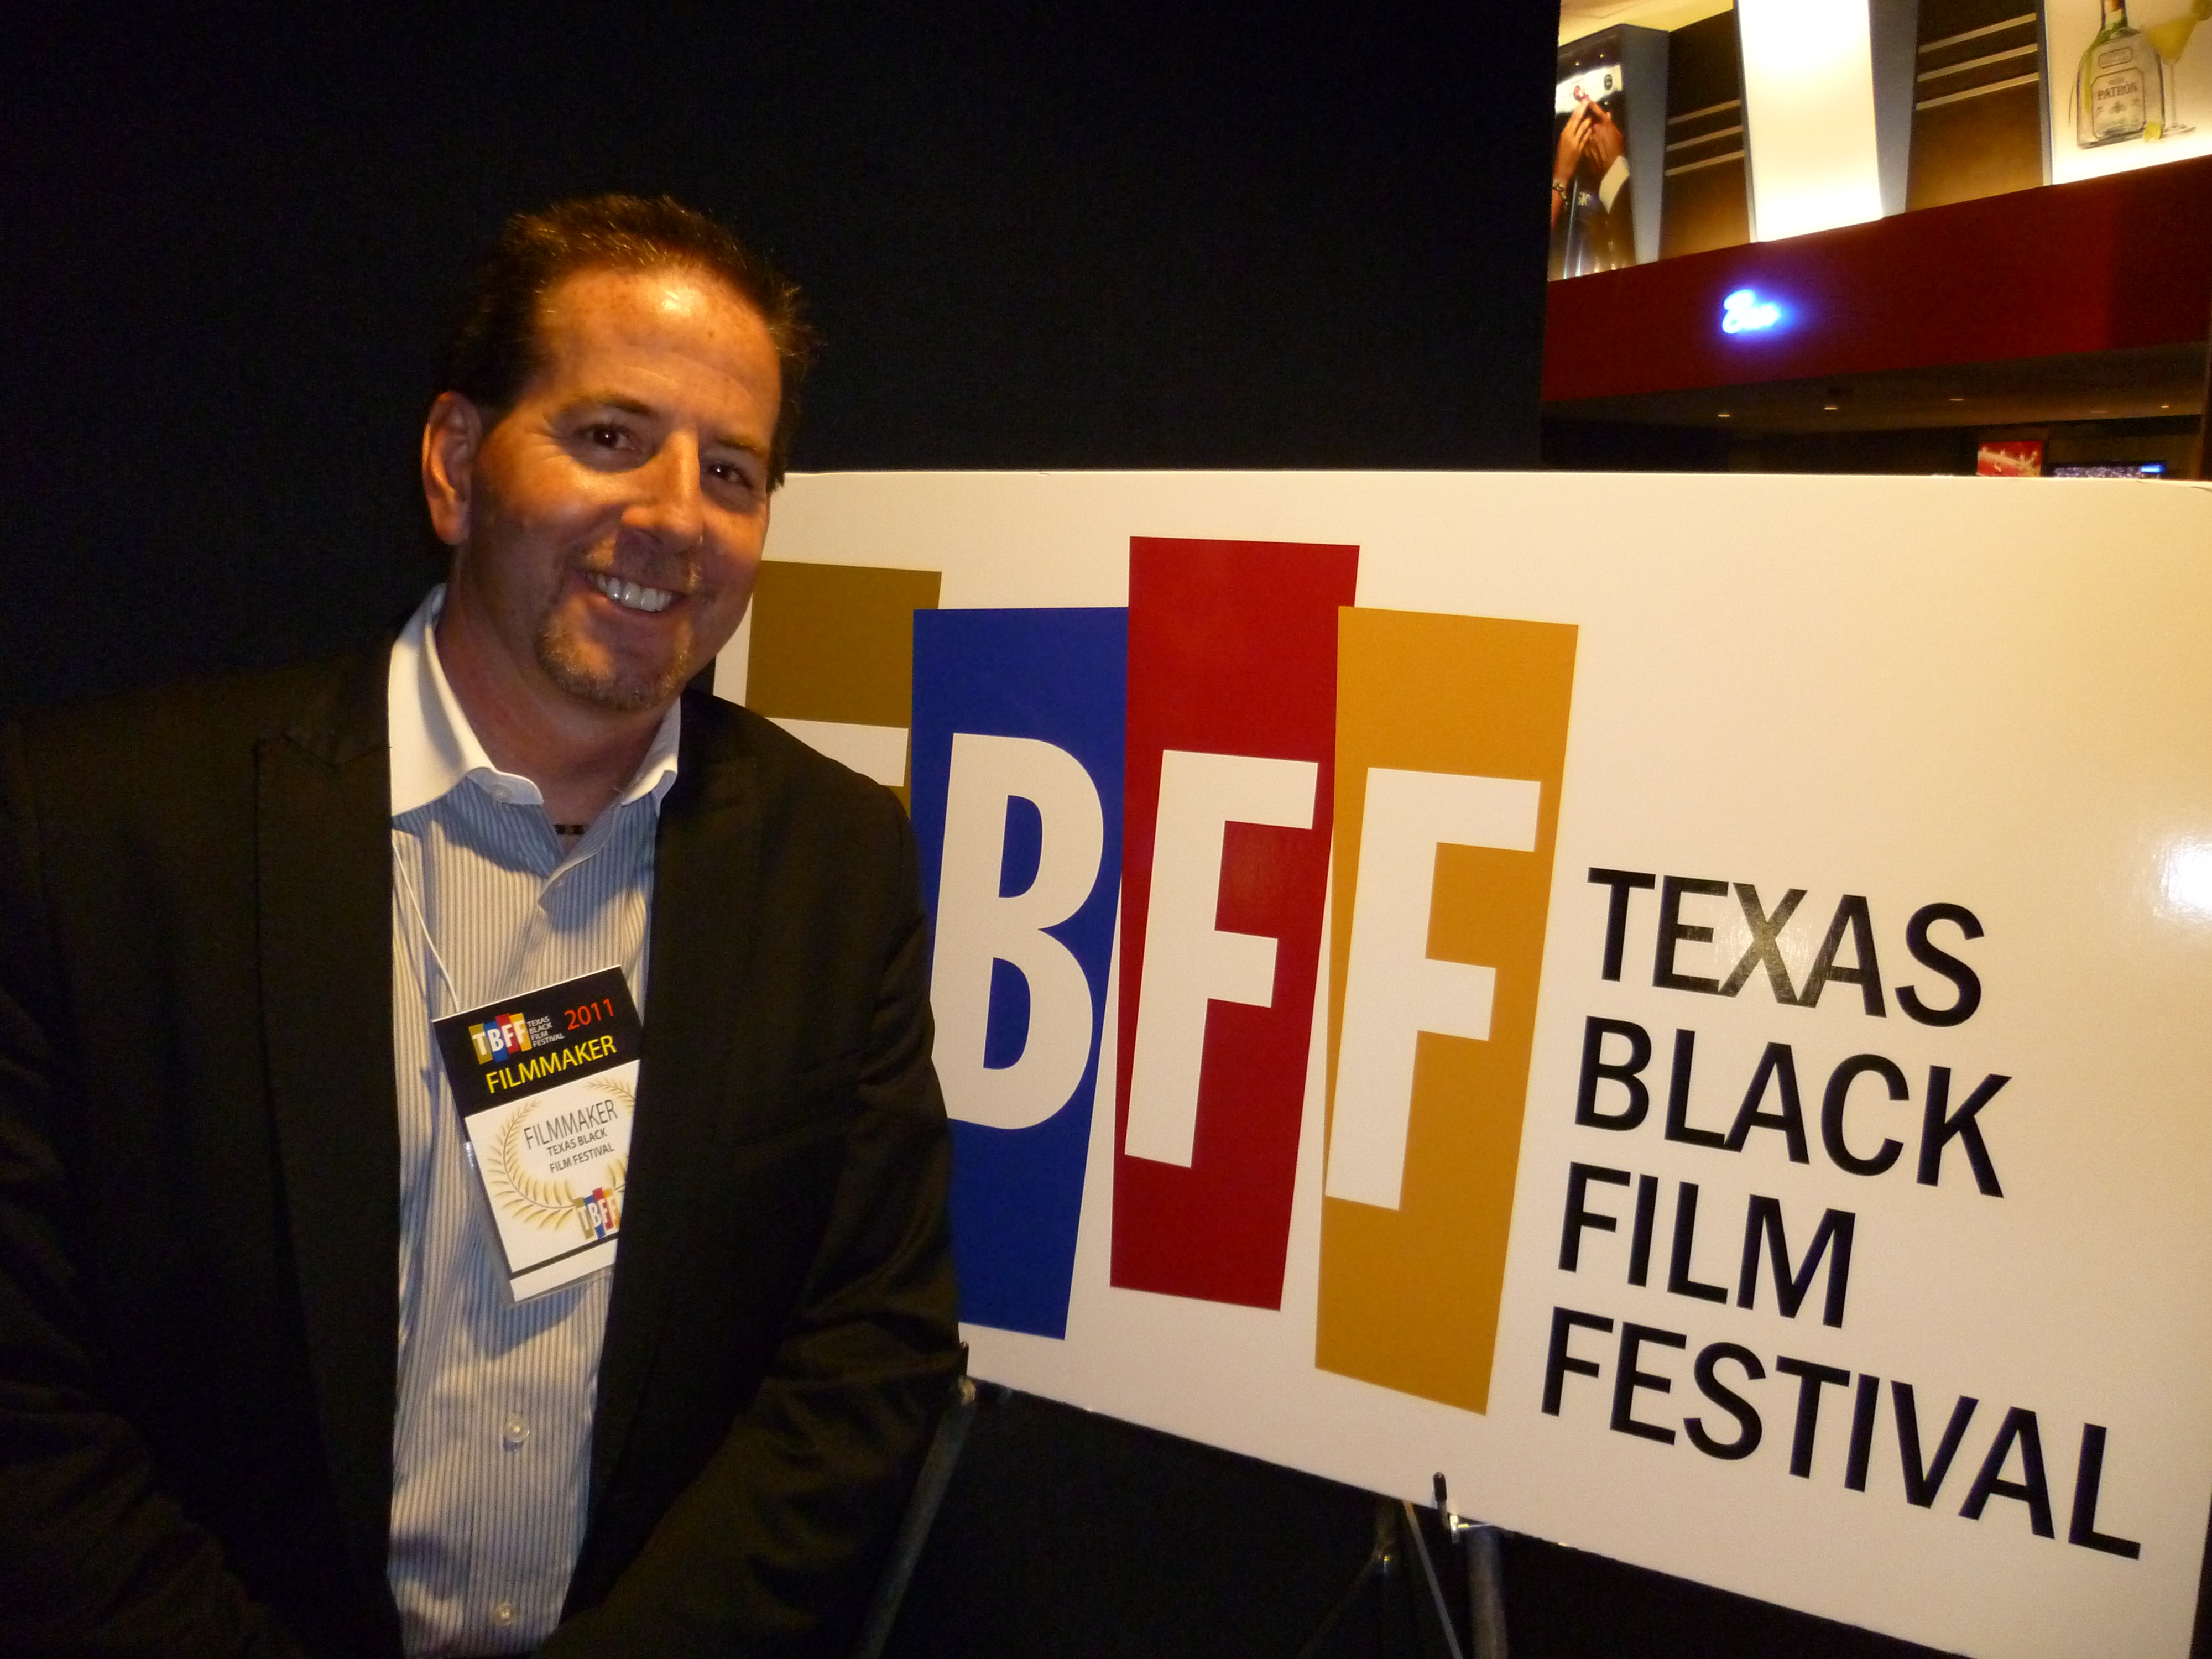 At the Texas Black Film Festival in Dallas back in January 2011 for Hott Damned